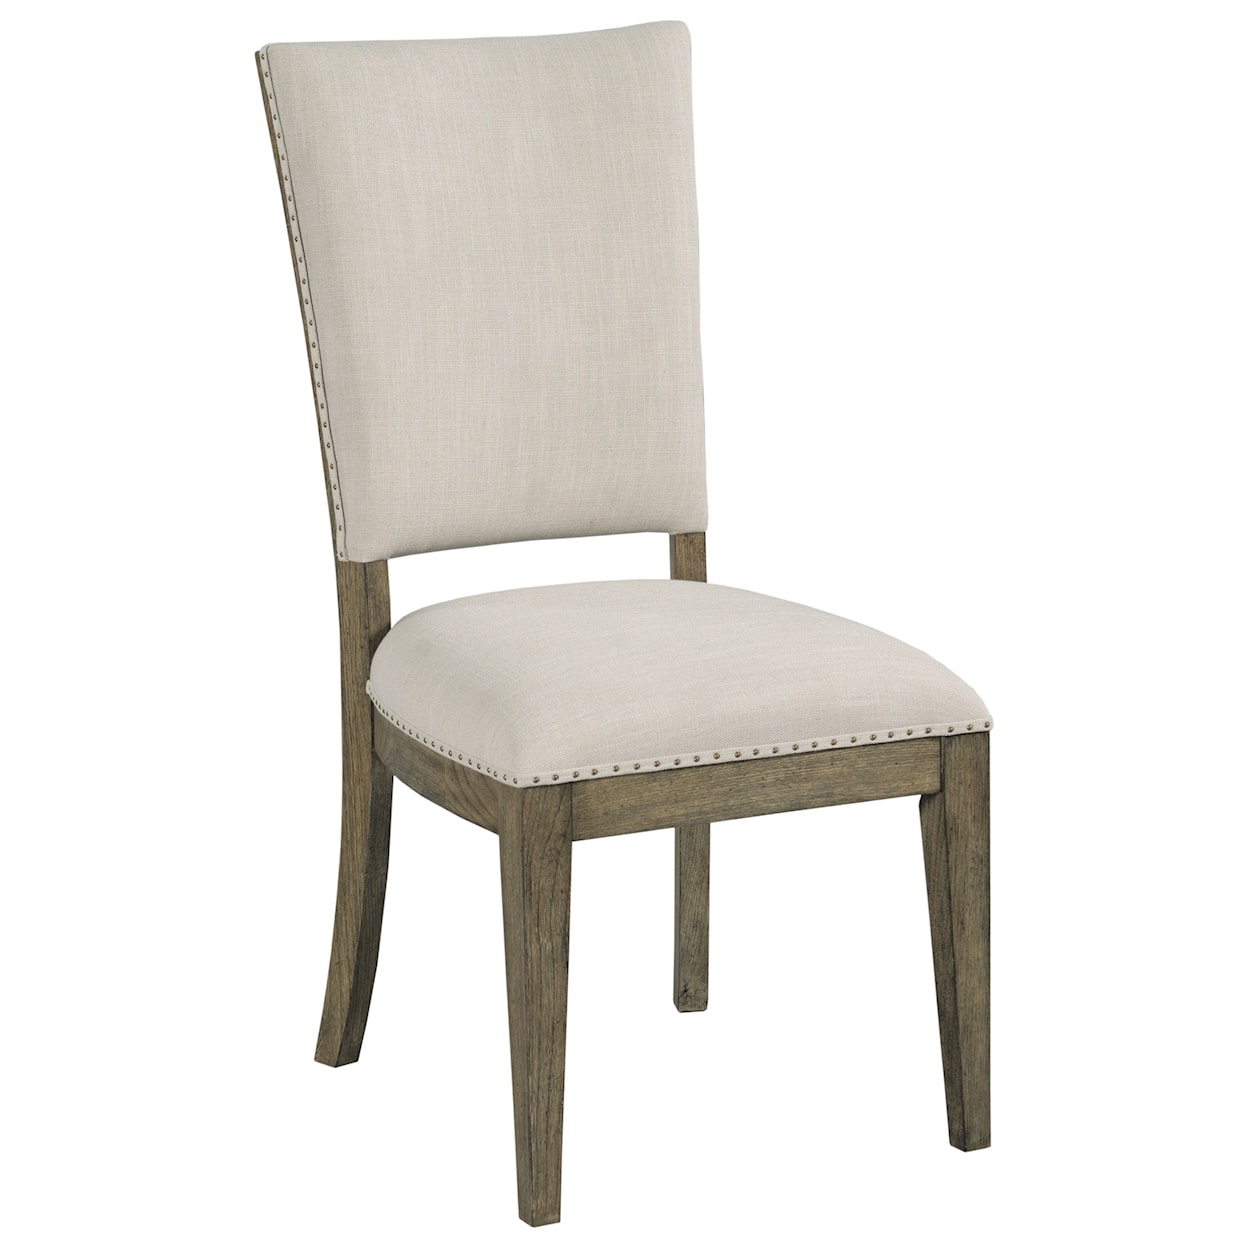 Kincaid Furniture Plank Road Howell Side Chair                           